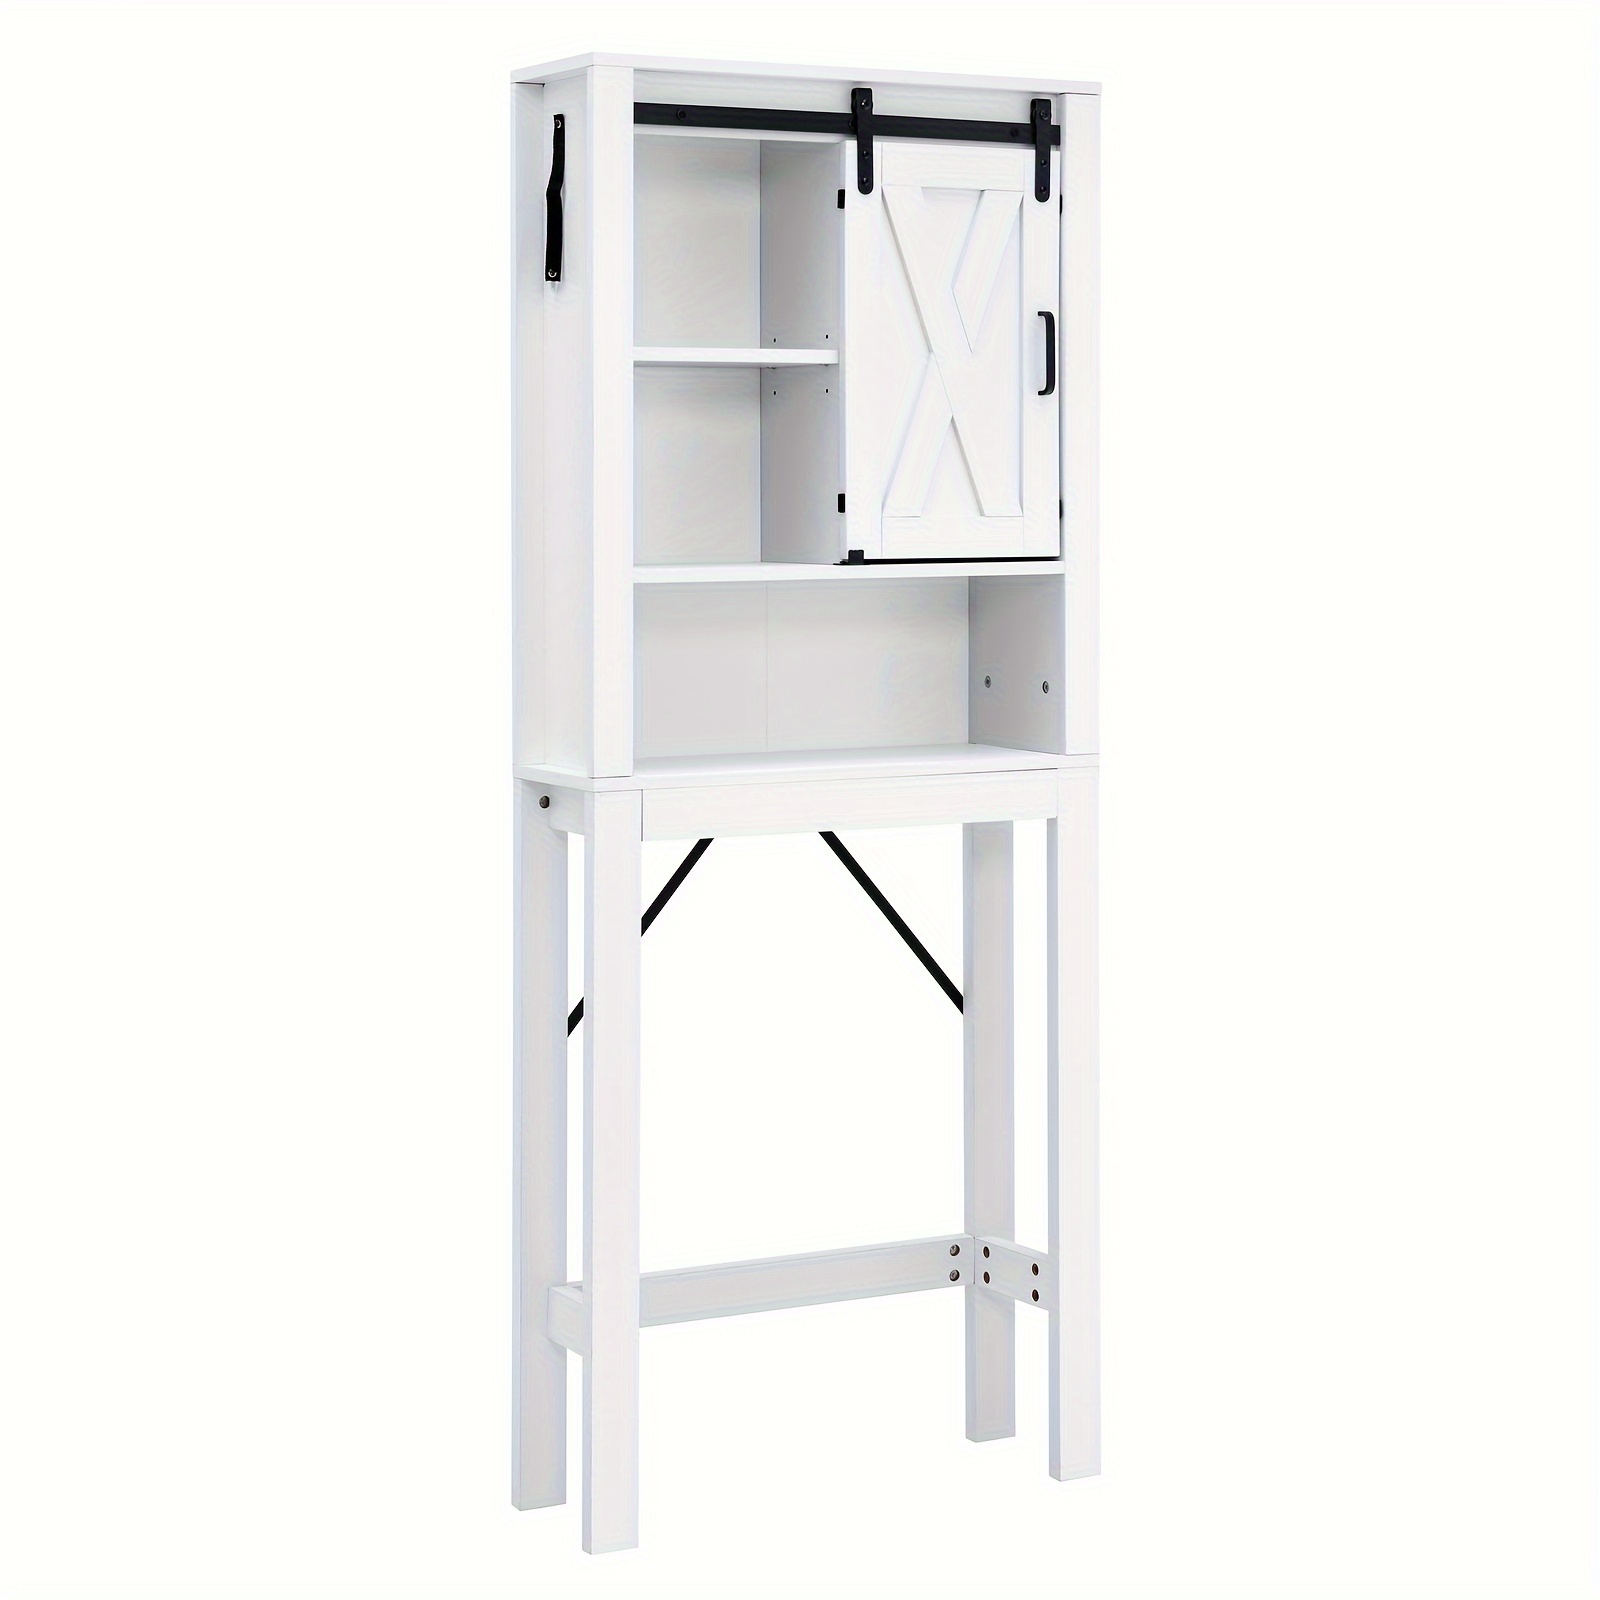 

1pc Over The Toilet Storage, Toilet Cabinet Bathroom Organize Shelf With Adjustable Shelves & Sliding Door, Freestanding Space Saver Toilet Stands, Multifunctional Above Toilet Rack, White